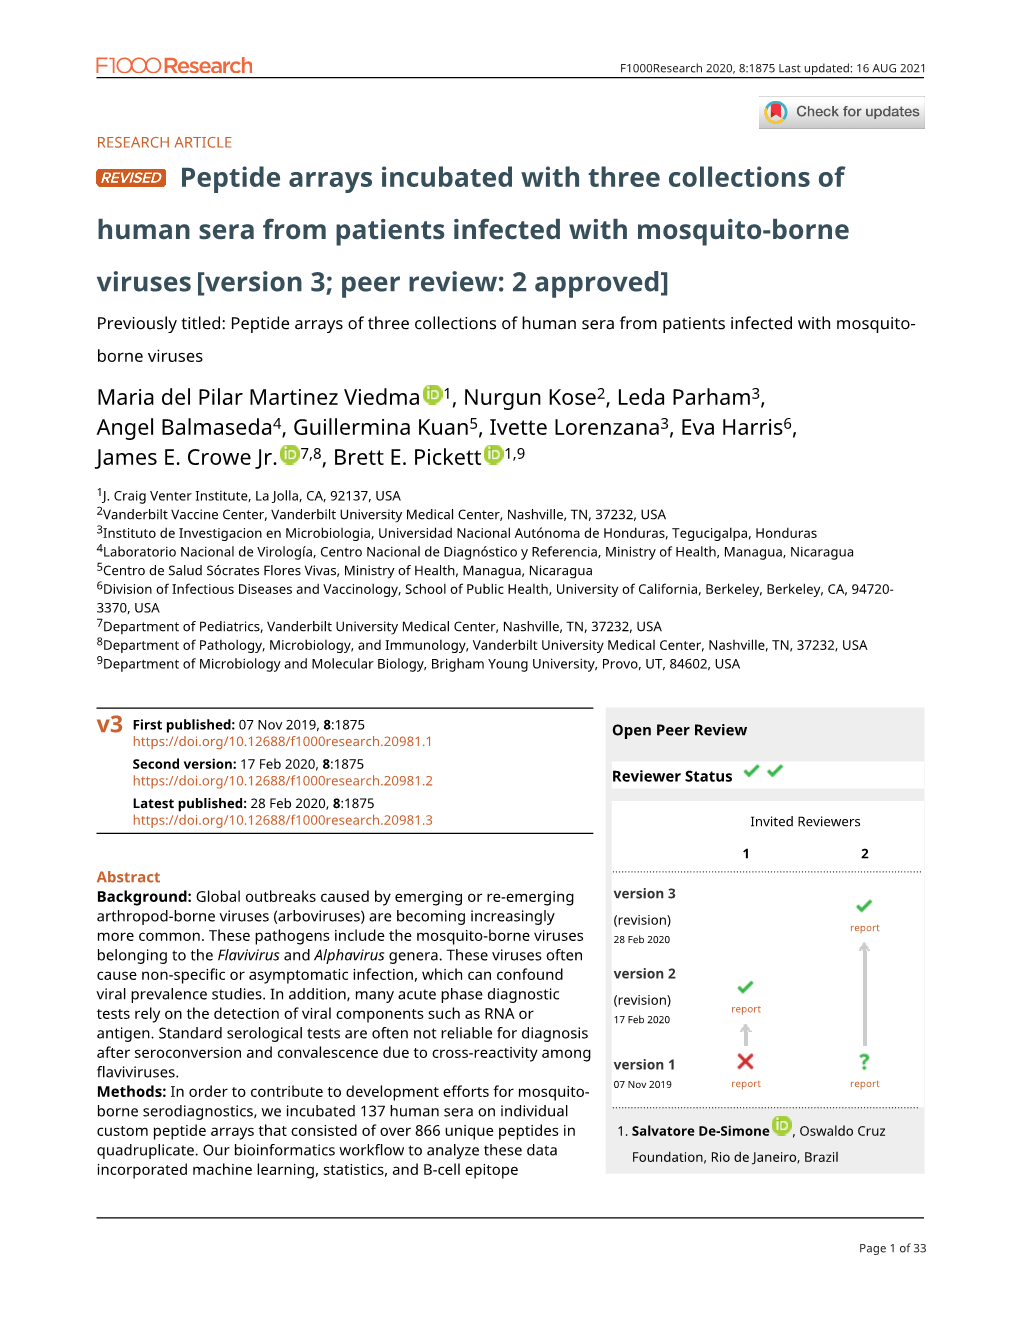 Peptide Arrays Incubated with Three Collections of Human Sera from Patients Infected with Mosquito-Borne Viruses [Version 3; Peer Review: 2 Approved]